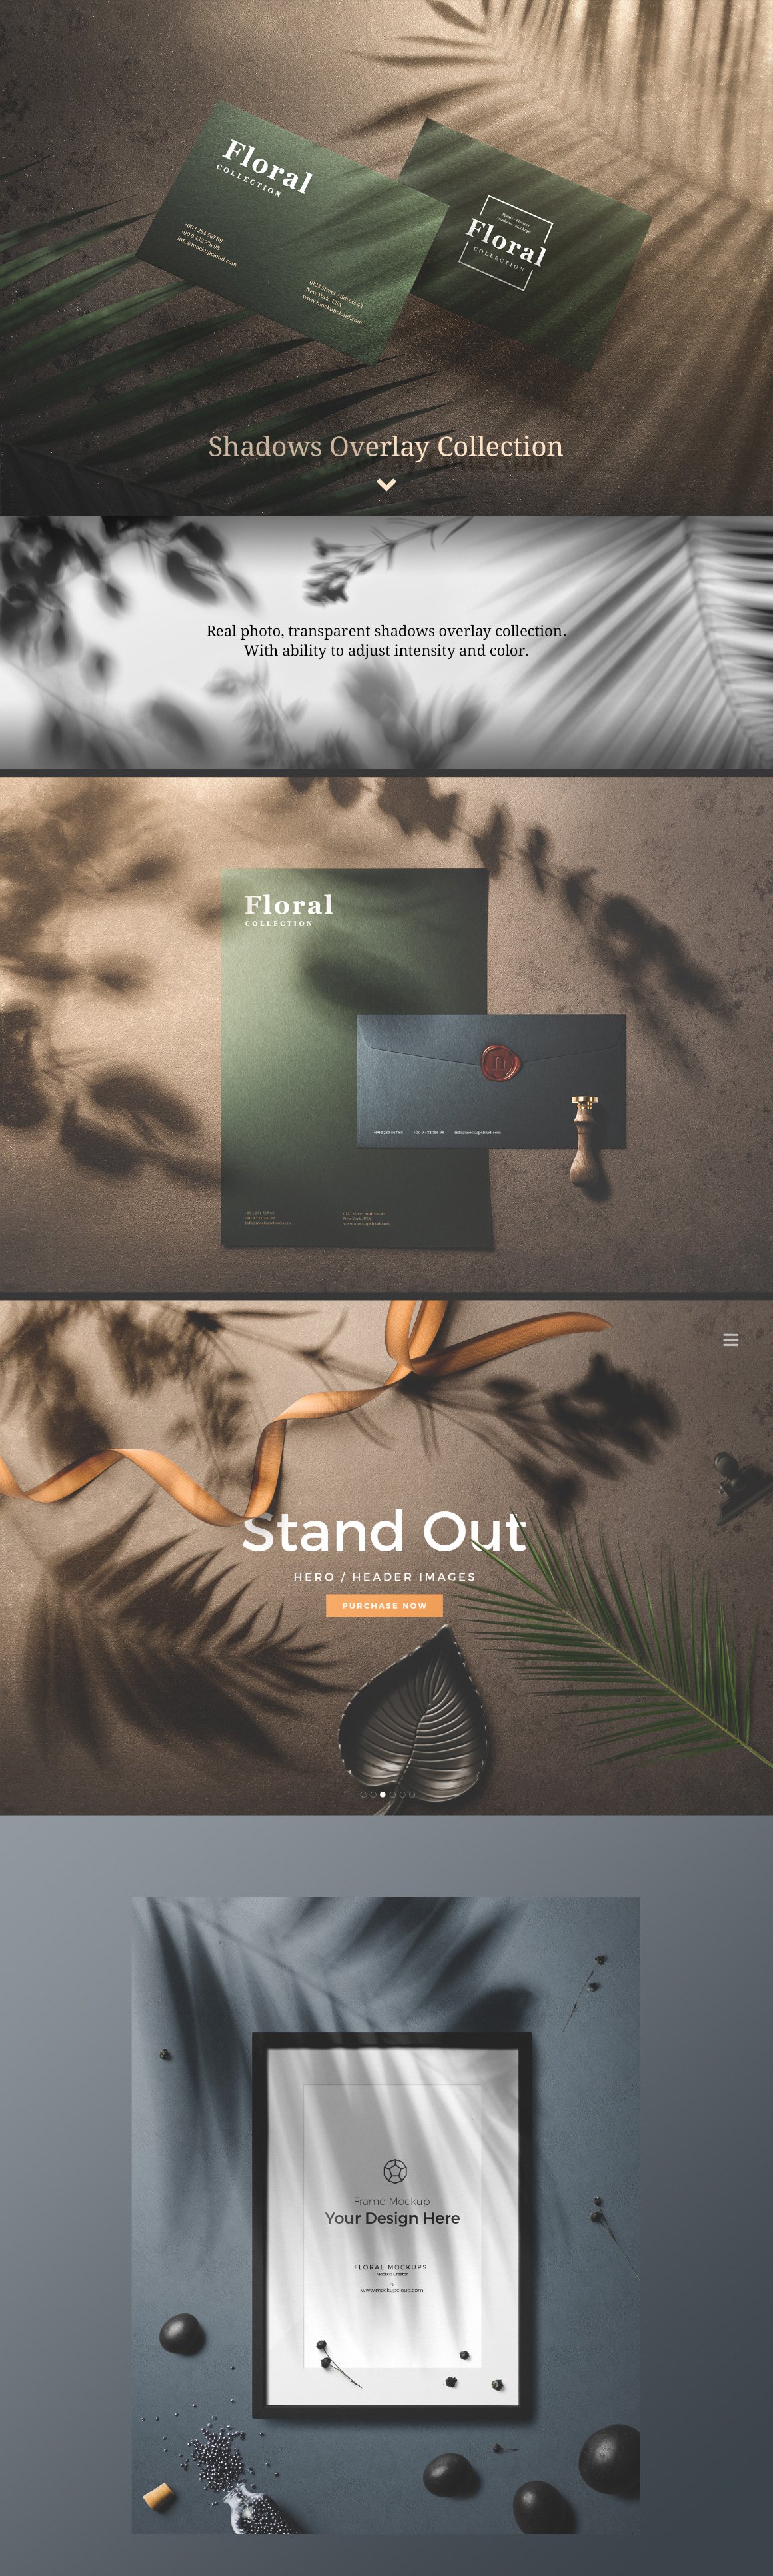 The Greatest Hits Mockup Collection